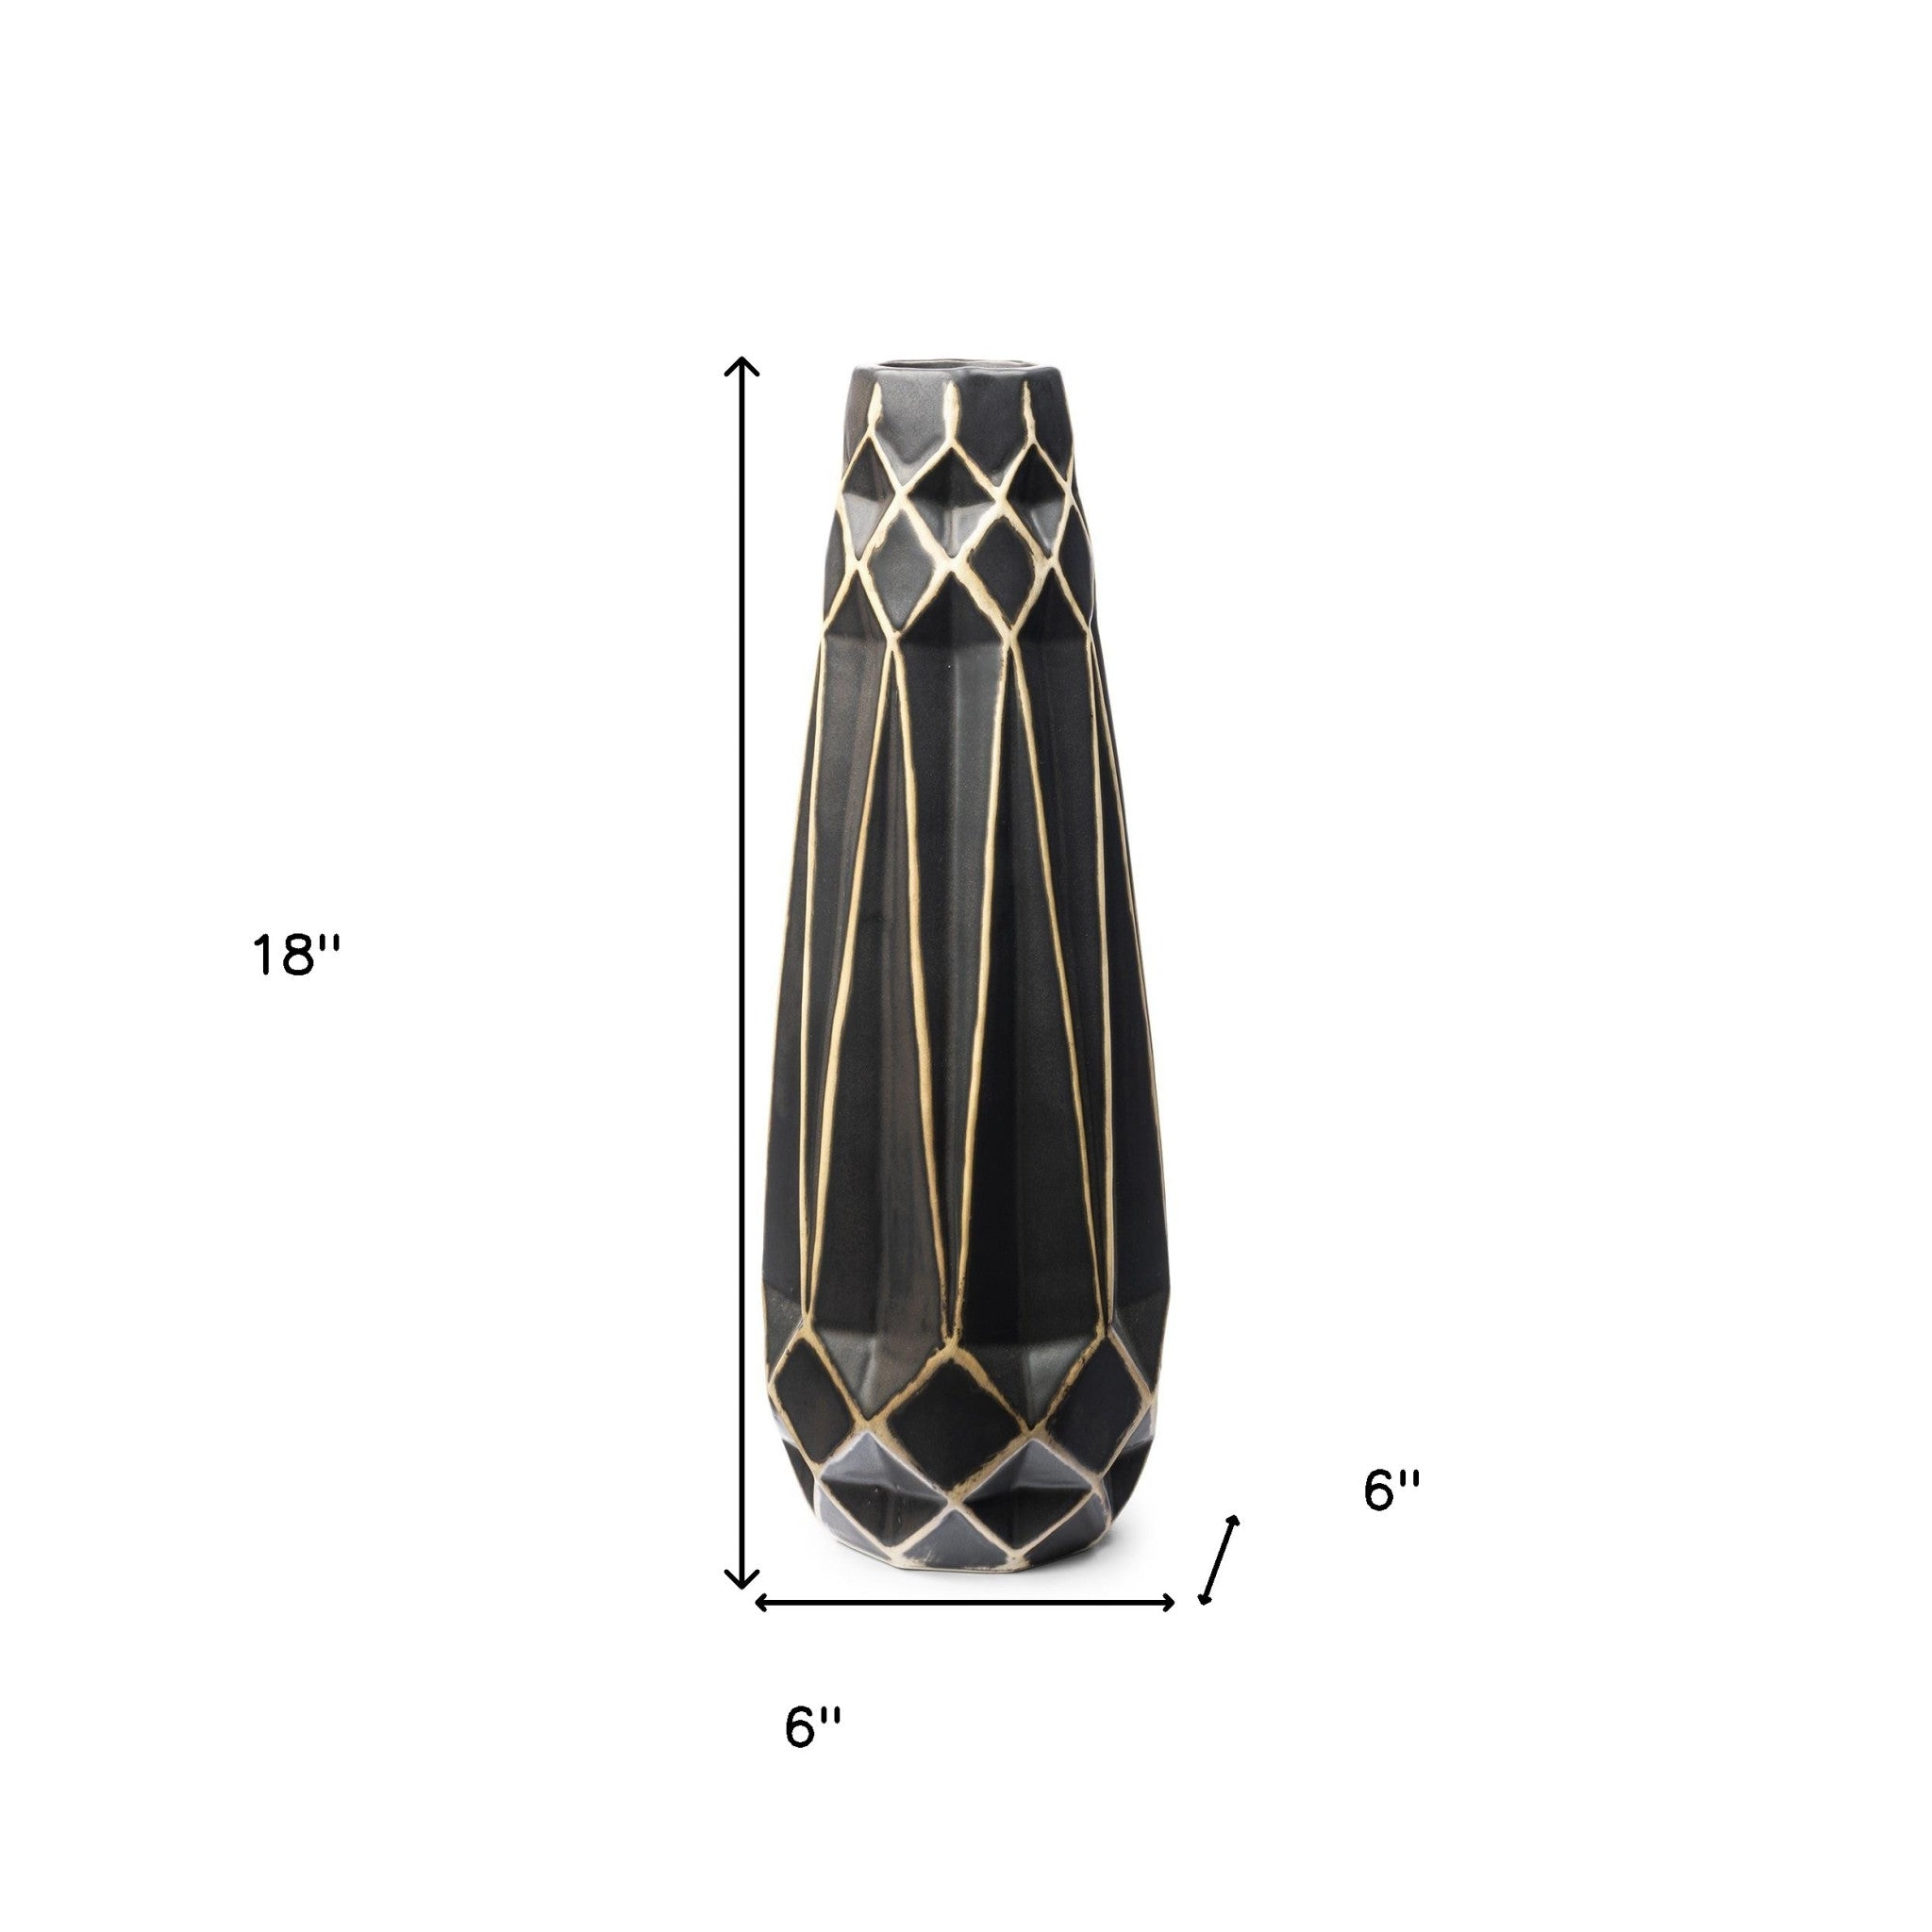 18" Ceramic Black and Gold Abstract Cylinder Table Vase